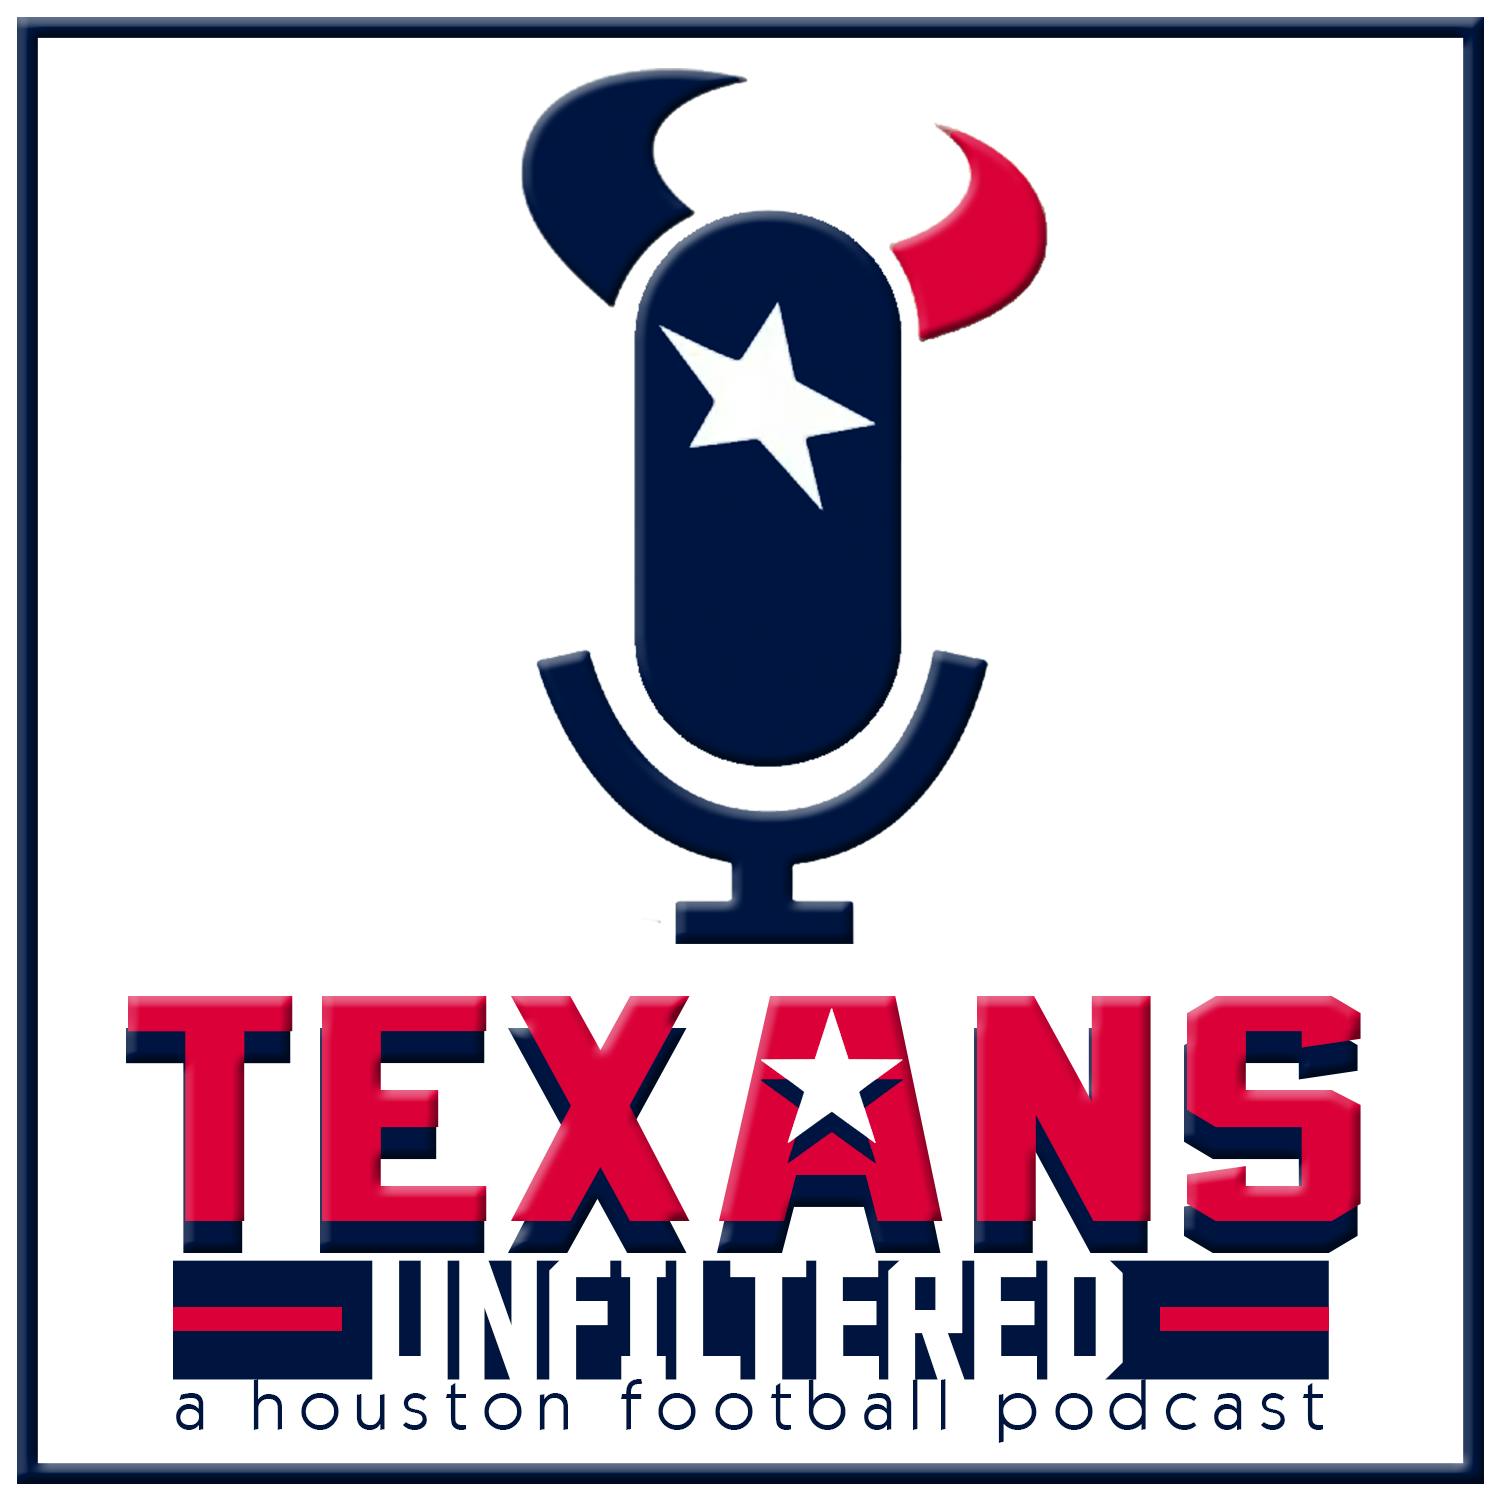 JJ Watt Announces He Is Retiring, Where The Texans Are At, & The Future Of Texans Unfiltered